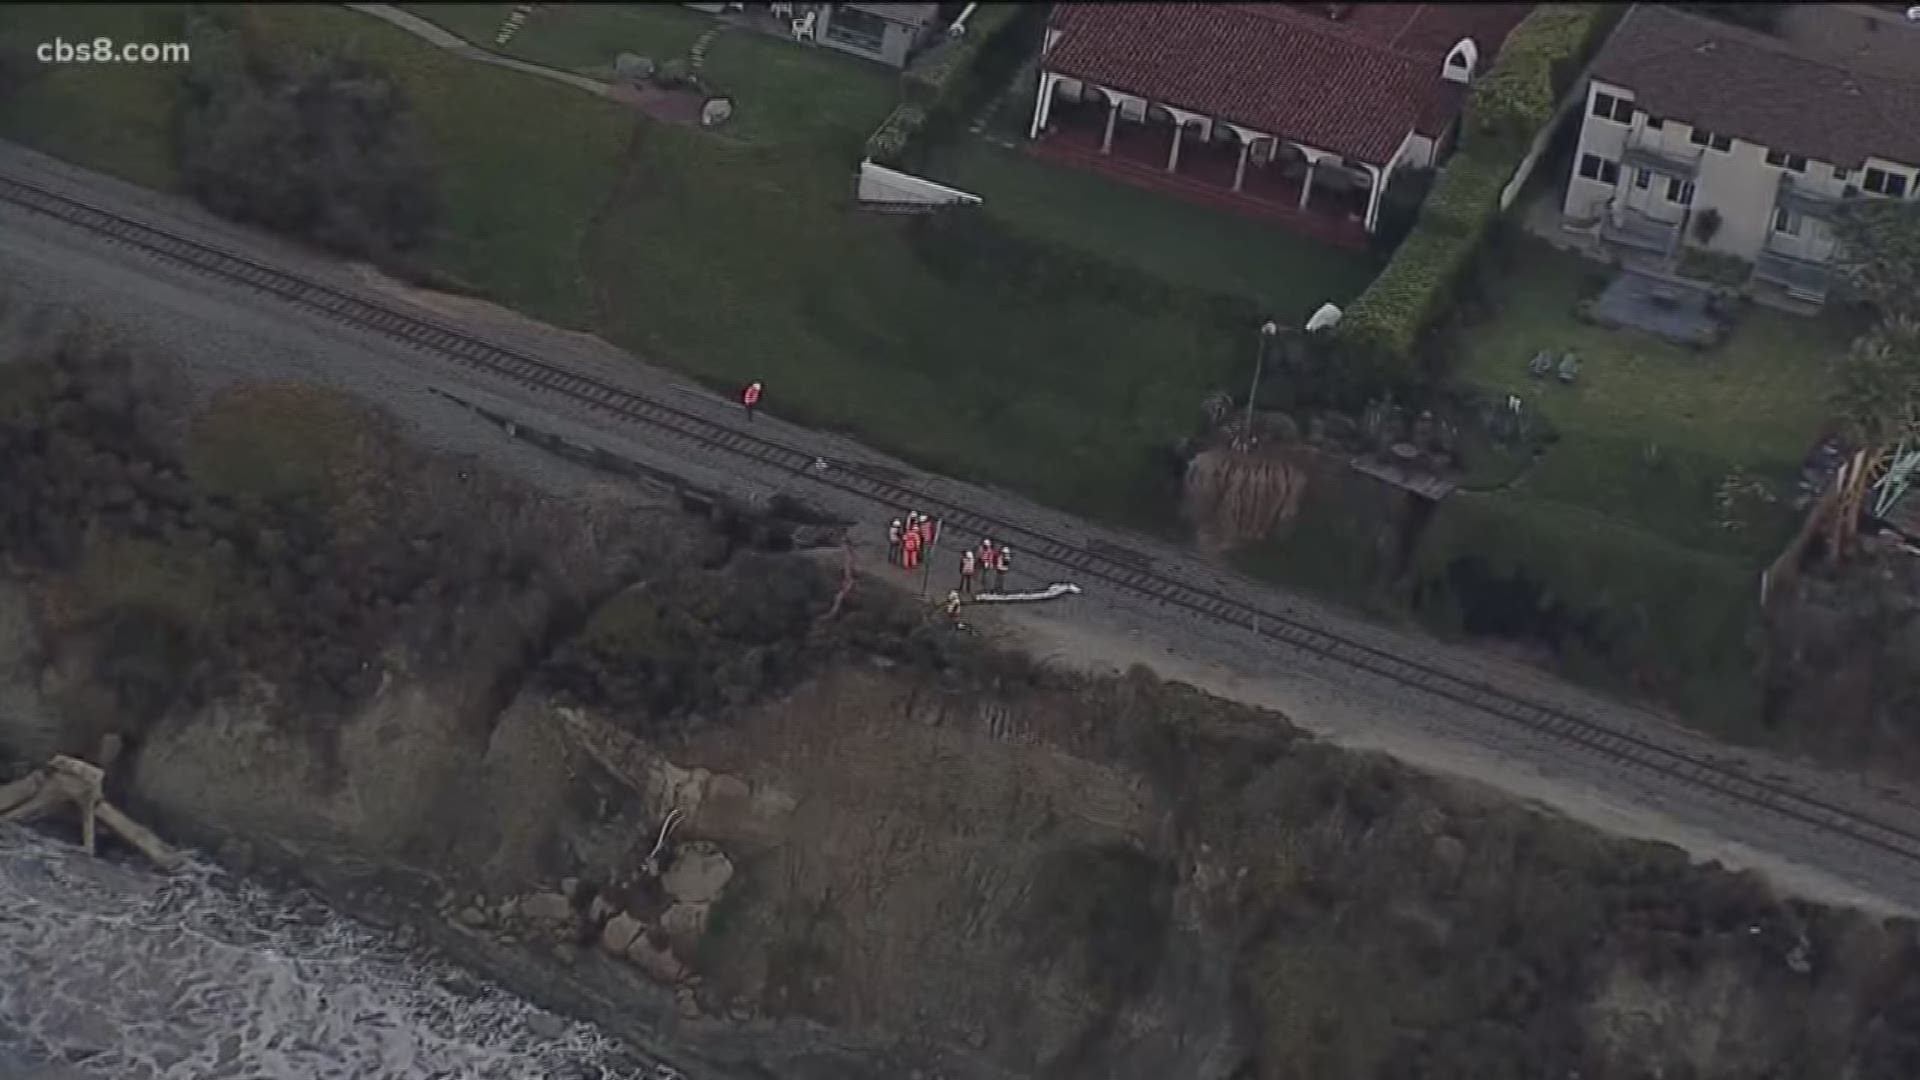 The NCTD announced that it will temporarily suspend service south of the Solana Beach rail station to repair a section of track washed out by this week's heavy rains